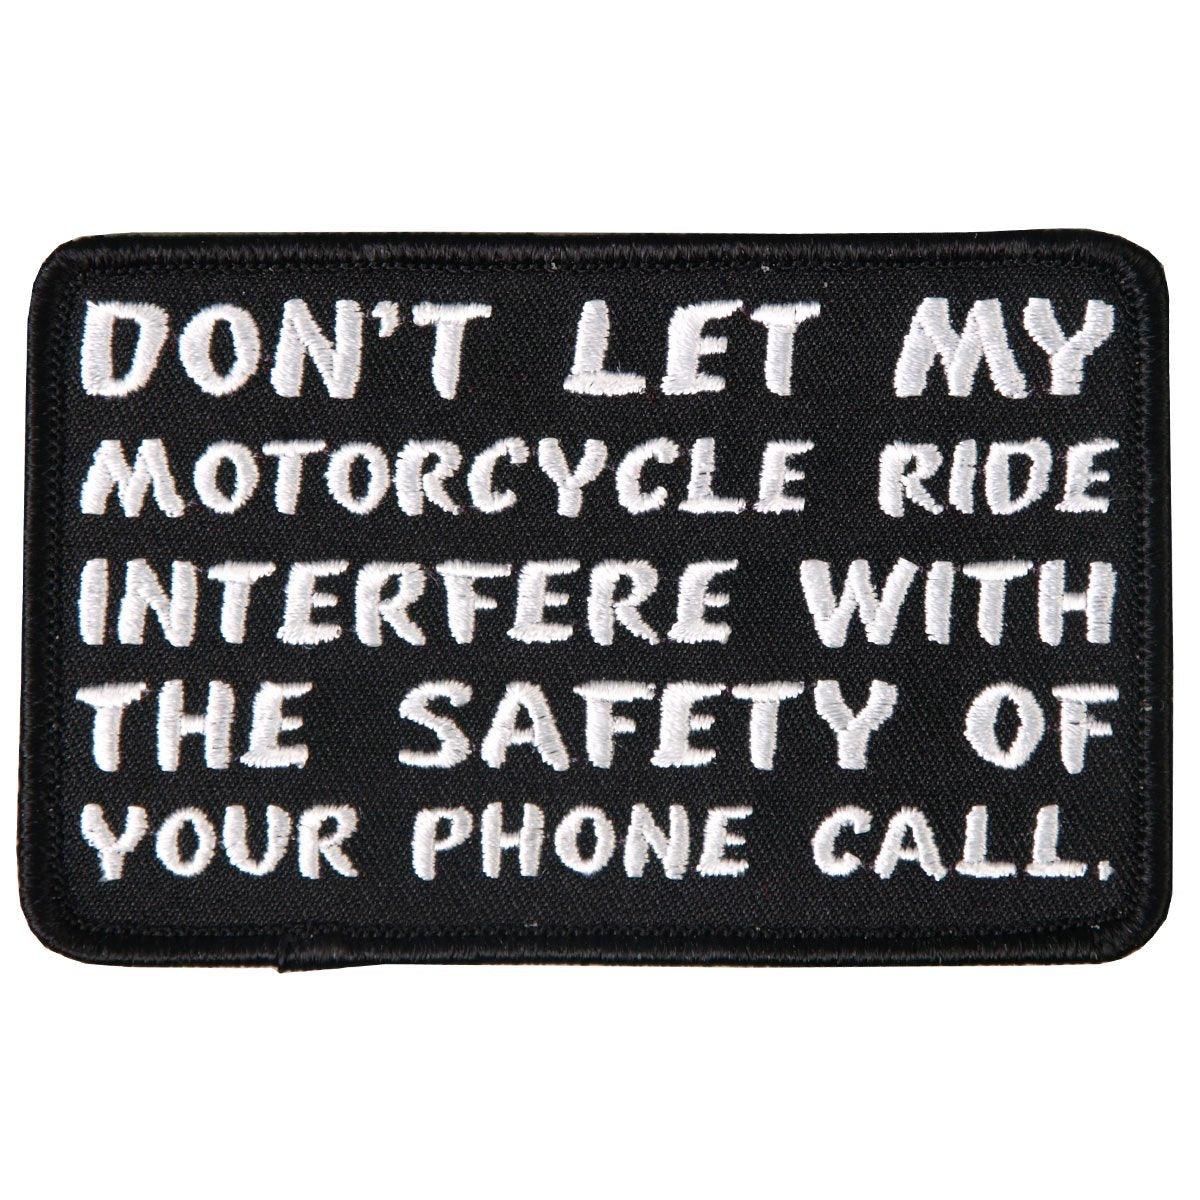 Hot Leathers Phone Call 4" X 3" Patch - American Legend Rider